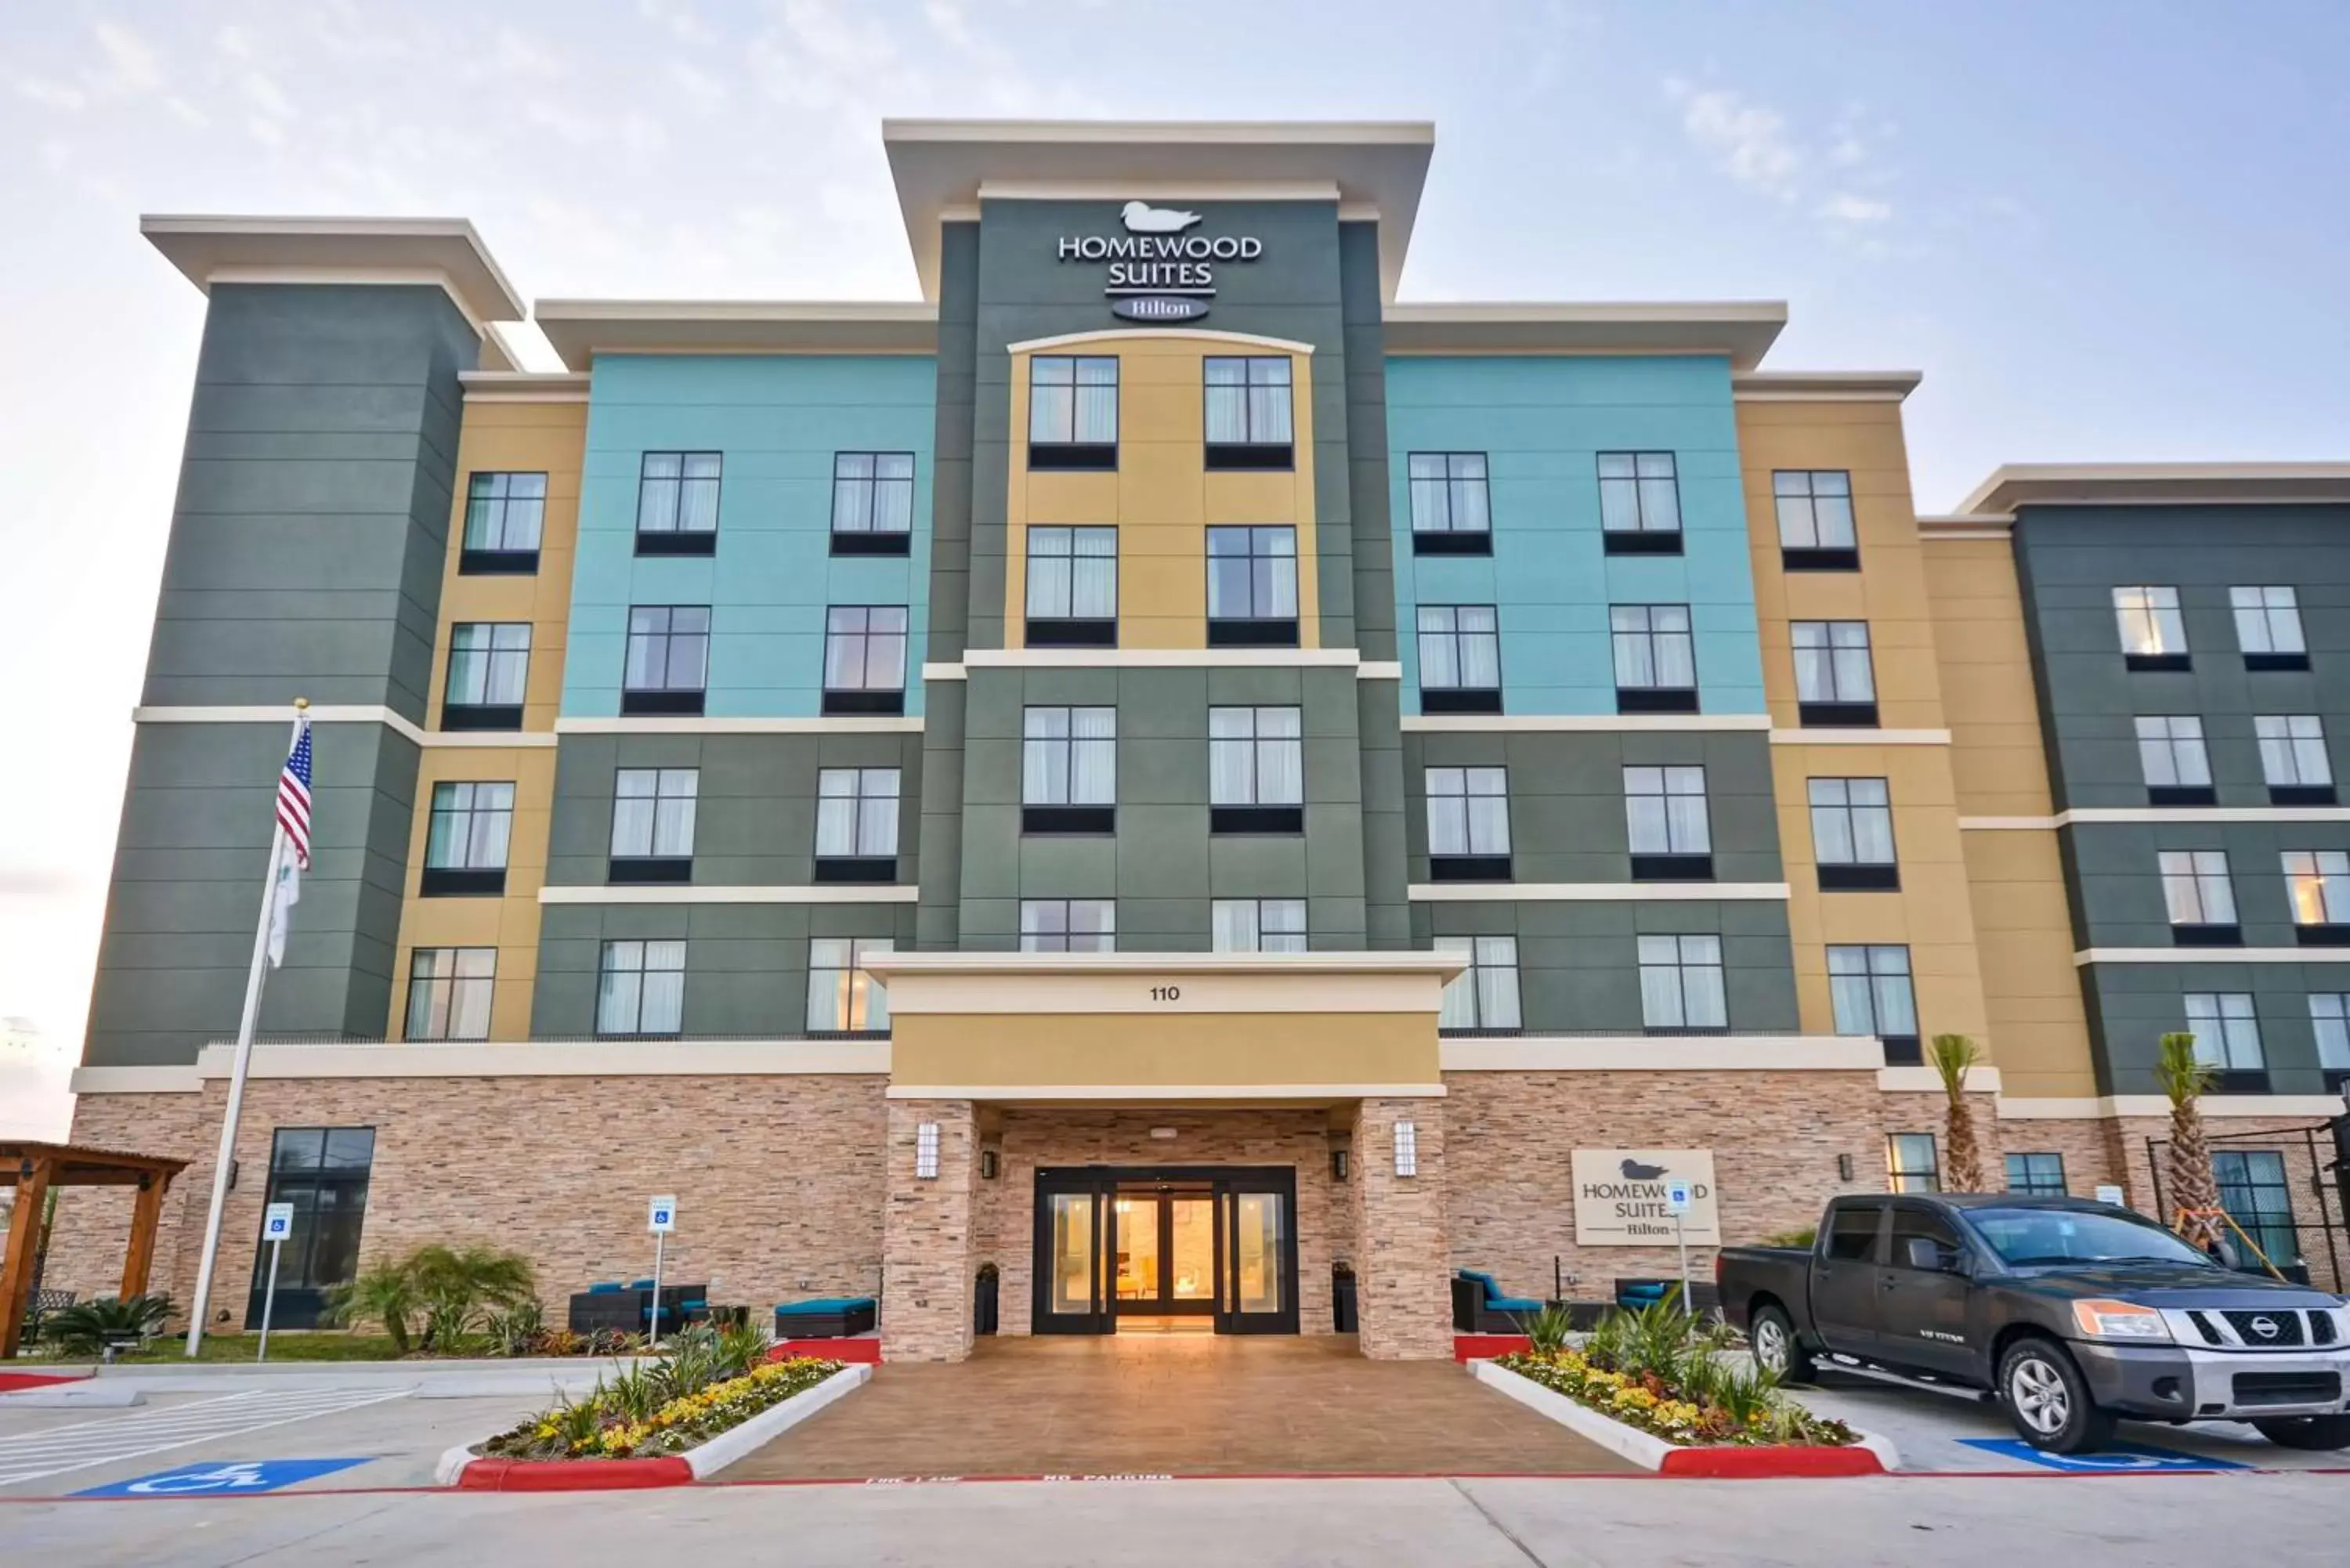 Property Building in Homewood Suites By Hilton Galveston